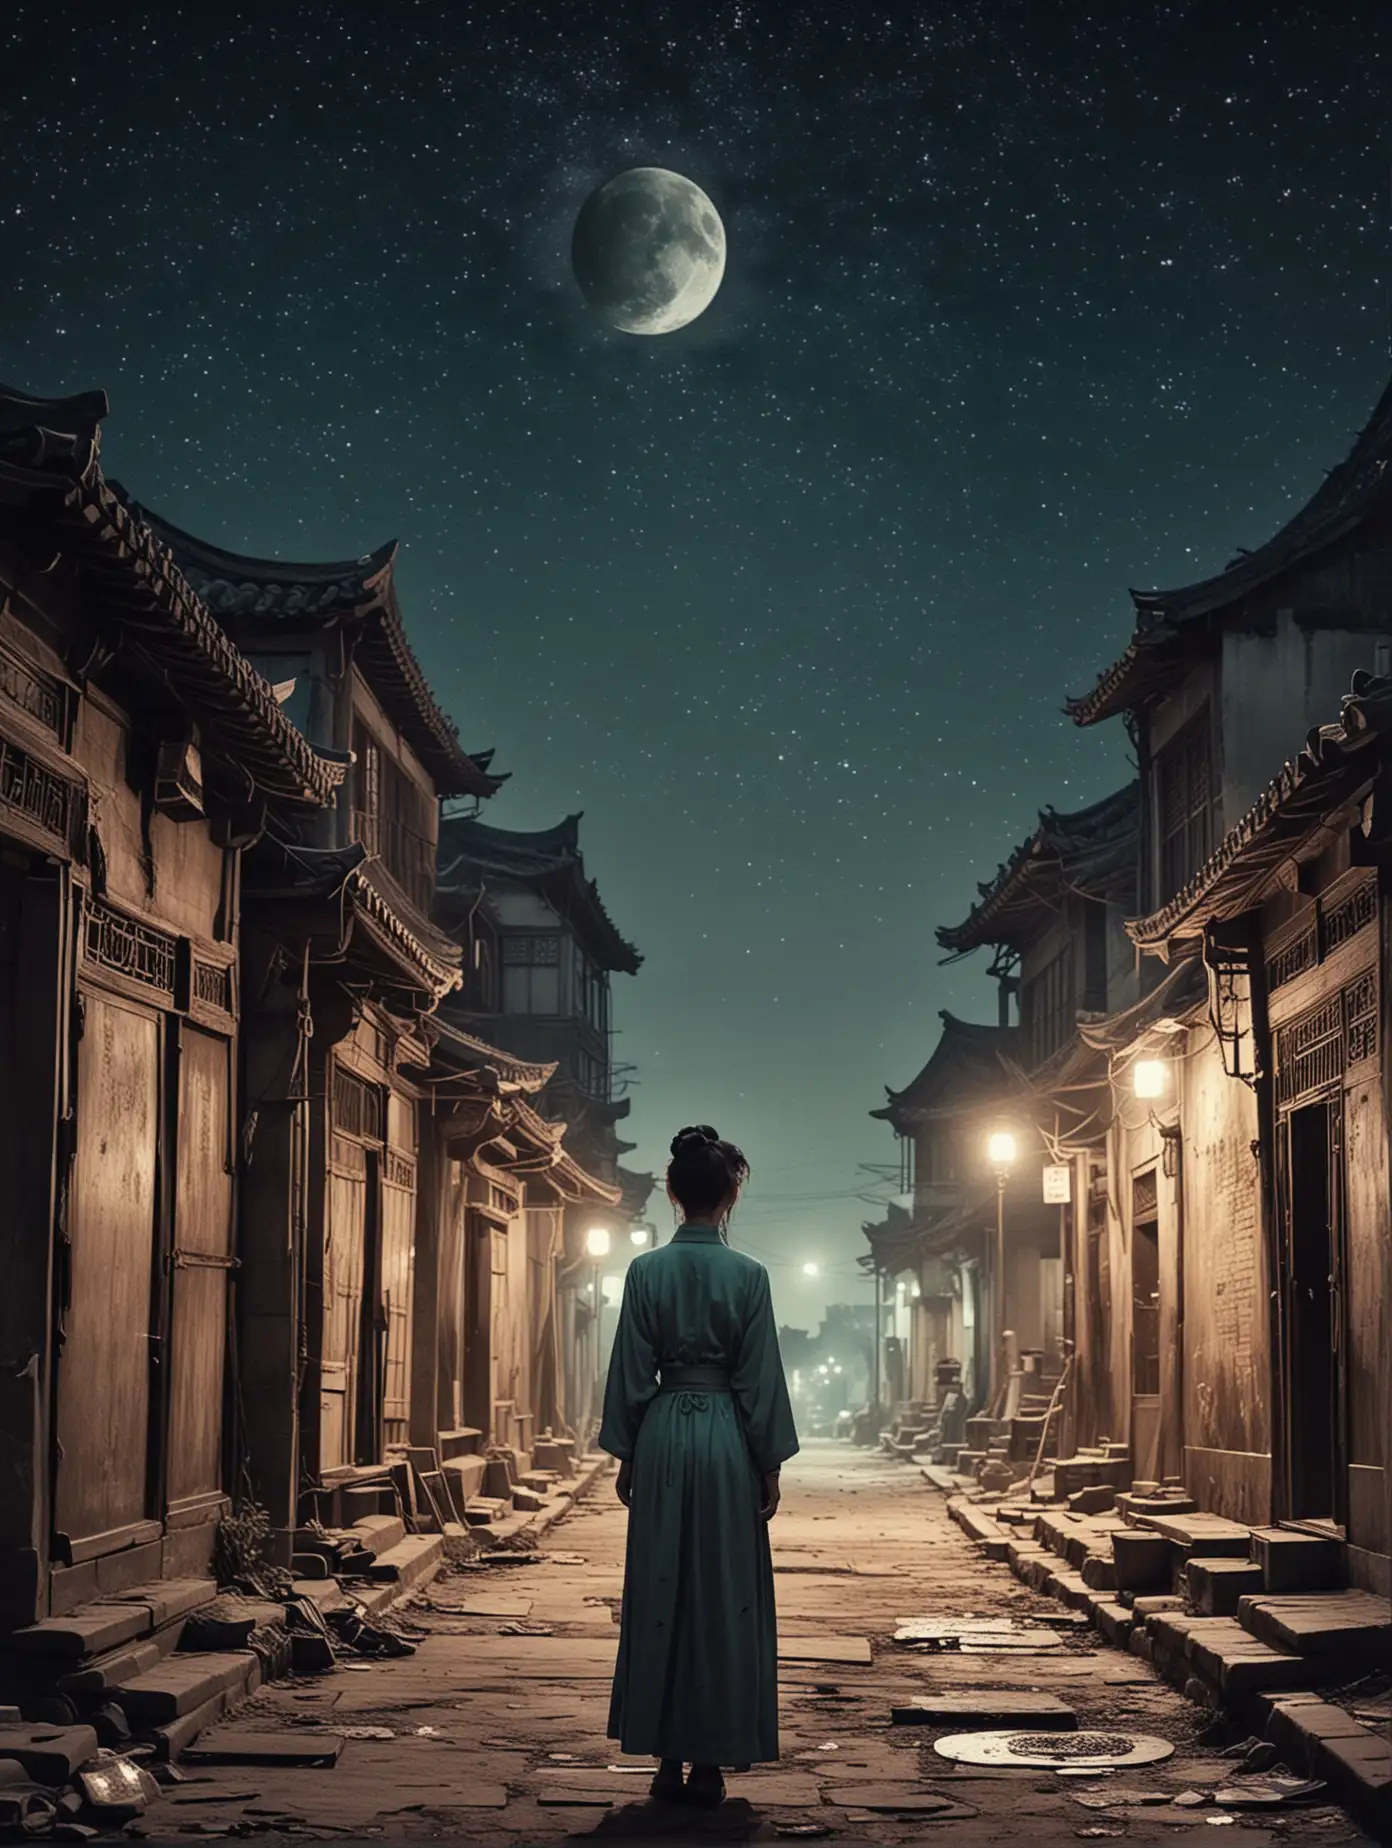 [An old photo from the Qing Dynasty, with 17-year-old Lin Qingxia on the dilapidated street.] dreamy lo-fi photography adds a whimsical touch, high contrast and saturation, while vibrant colors and the presence of scribbles evokes a sense of mystery. The moon and stars in the background illuminate the scene, creating a truly enchanting image. Emphasis on mixed media collage